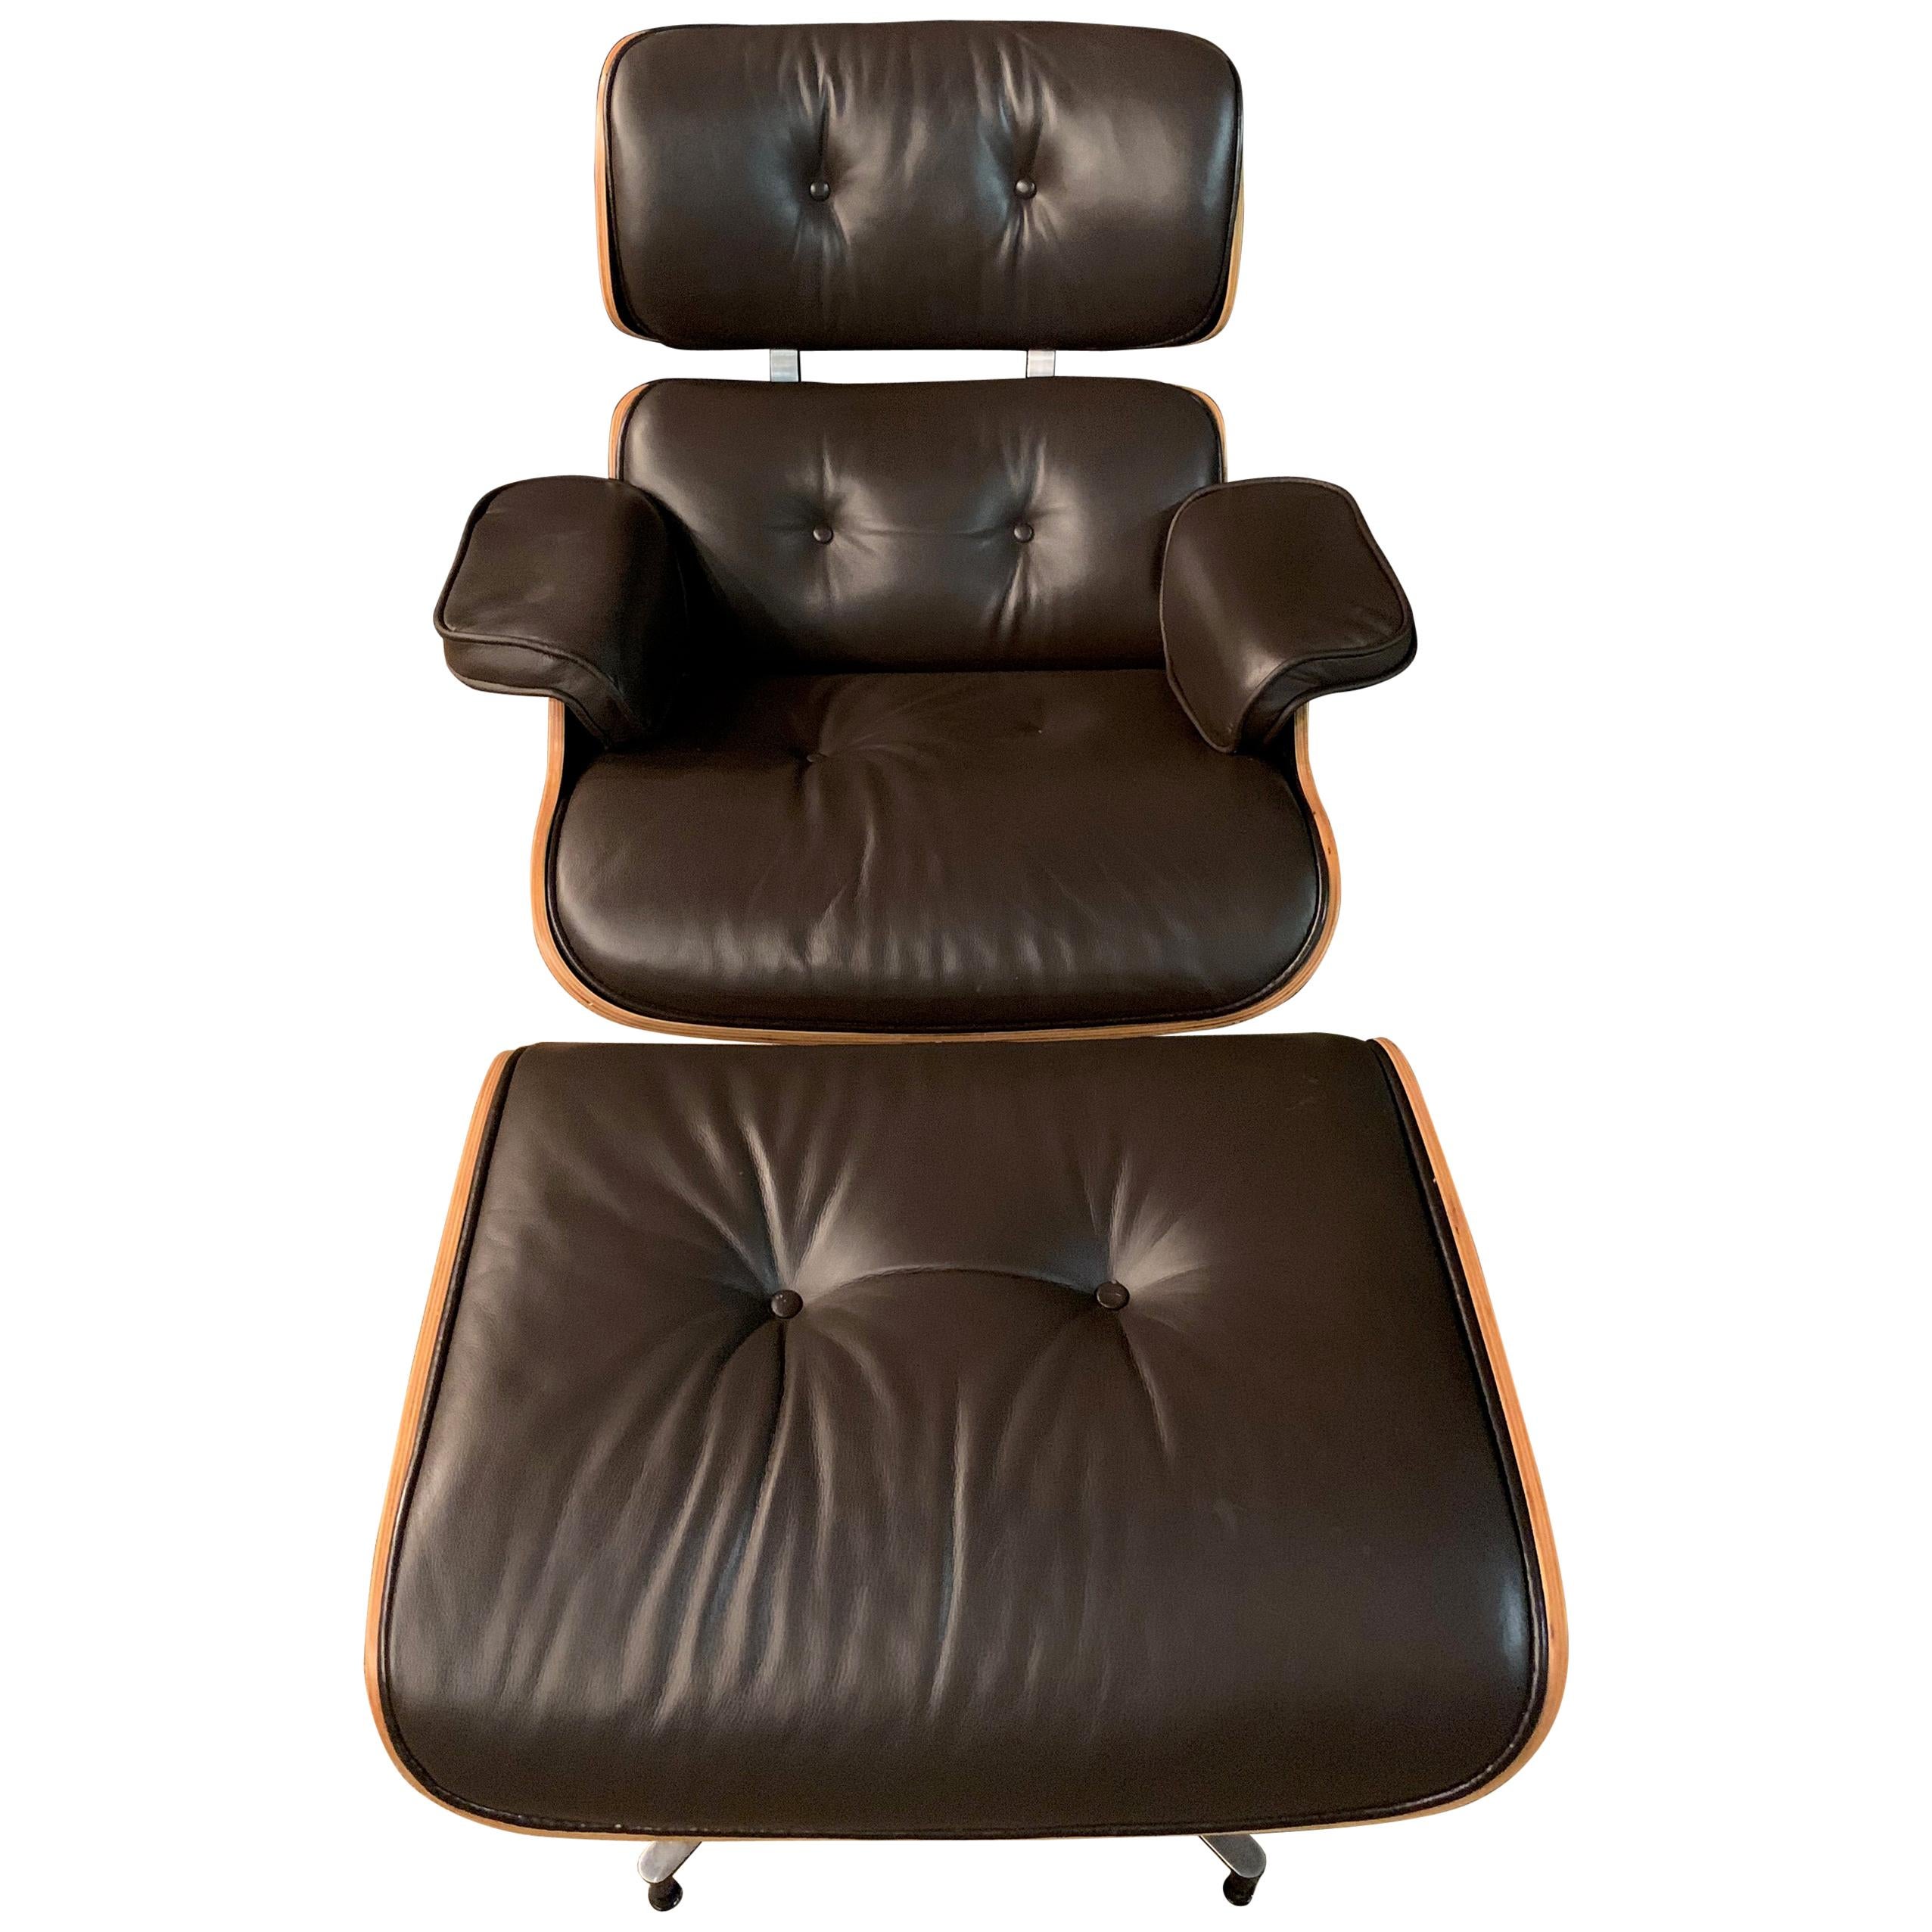 Charles Eames Style Lounge Chair with Ottoman real Leather